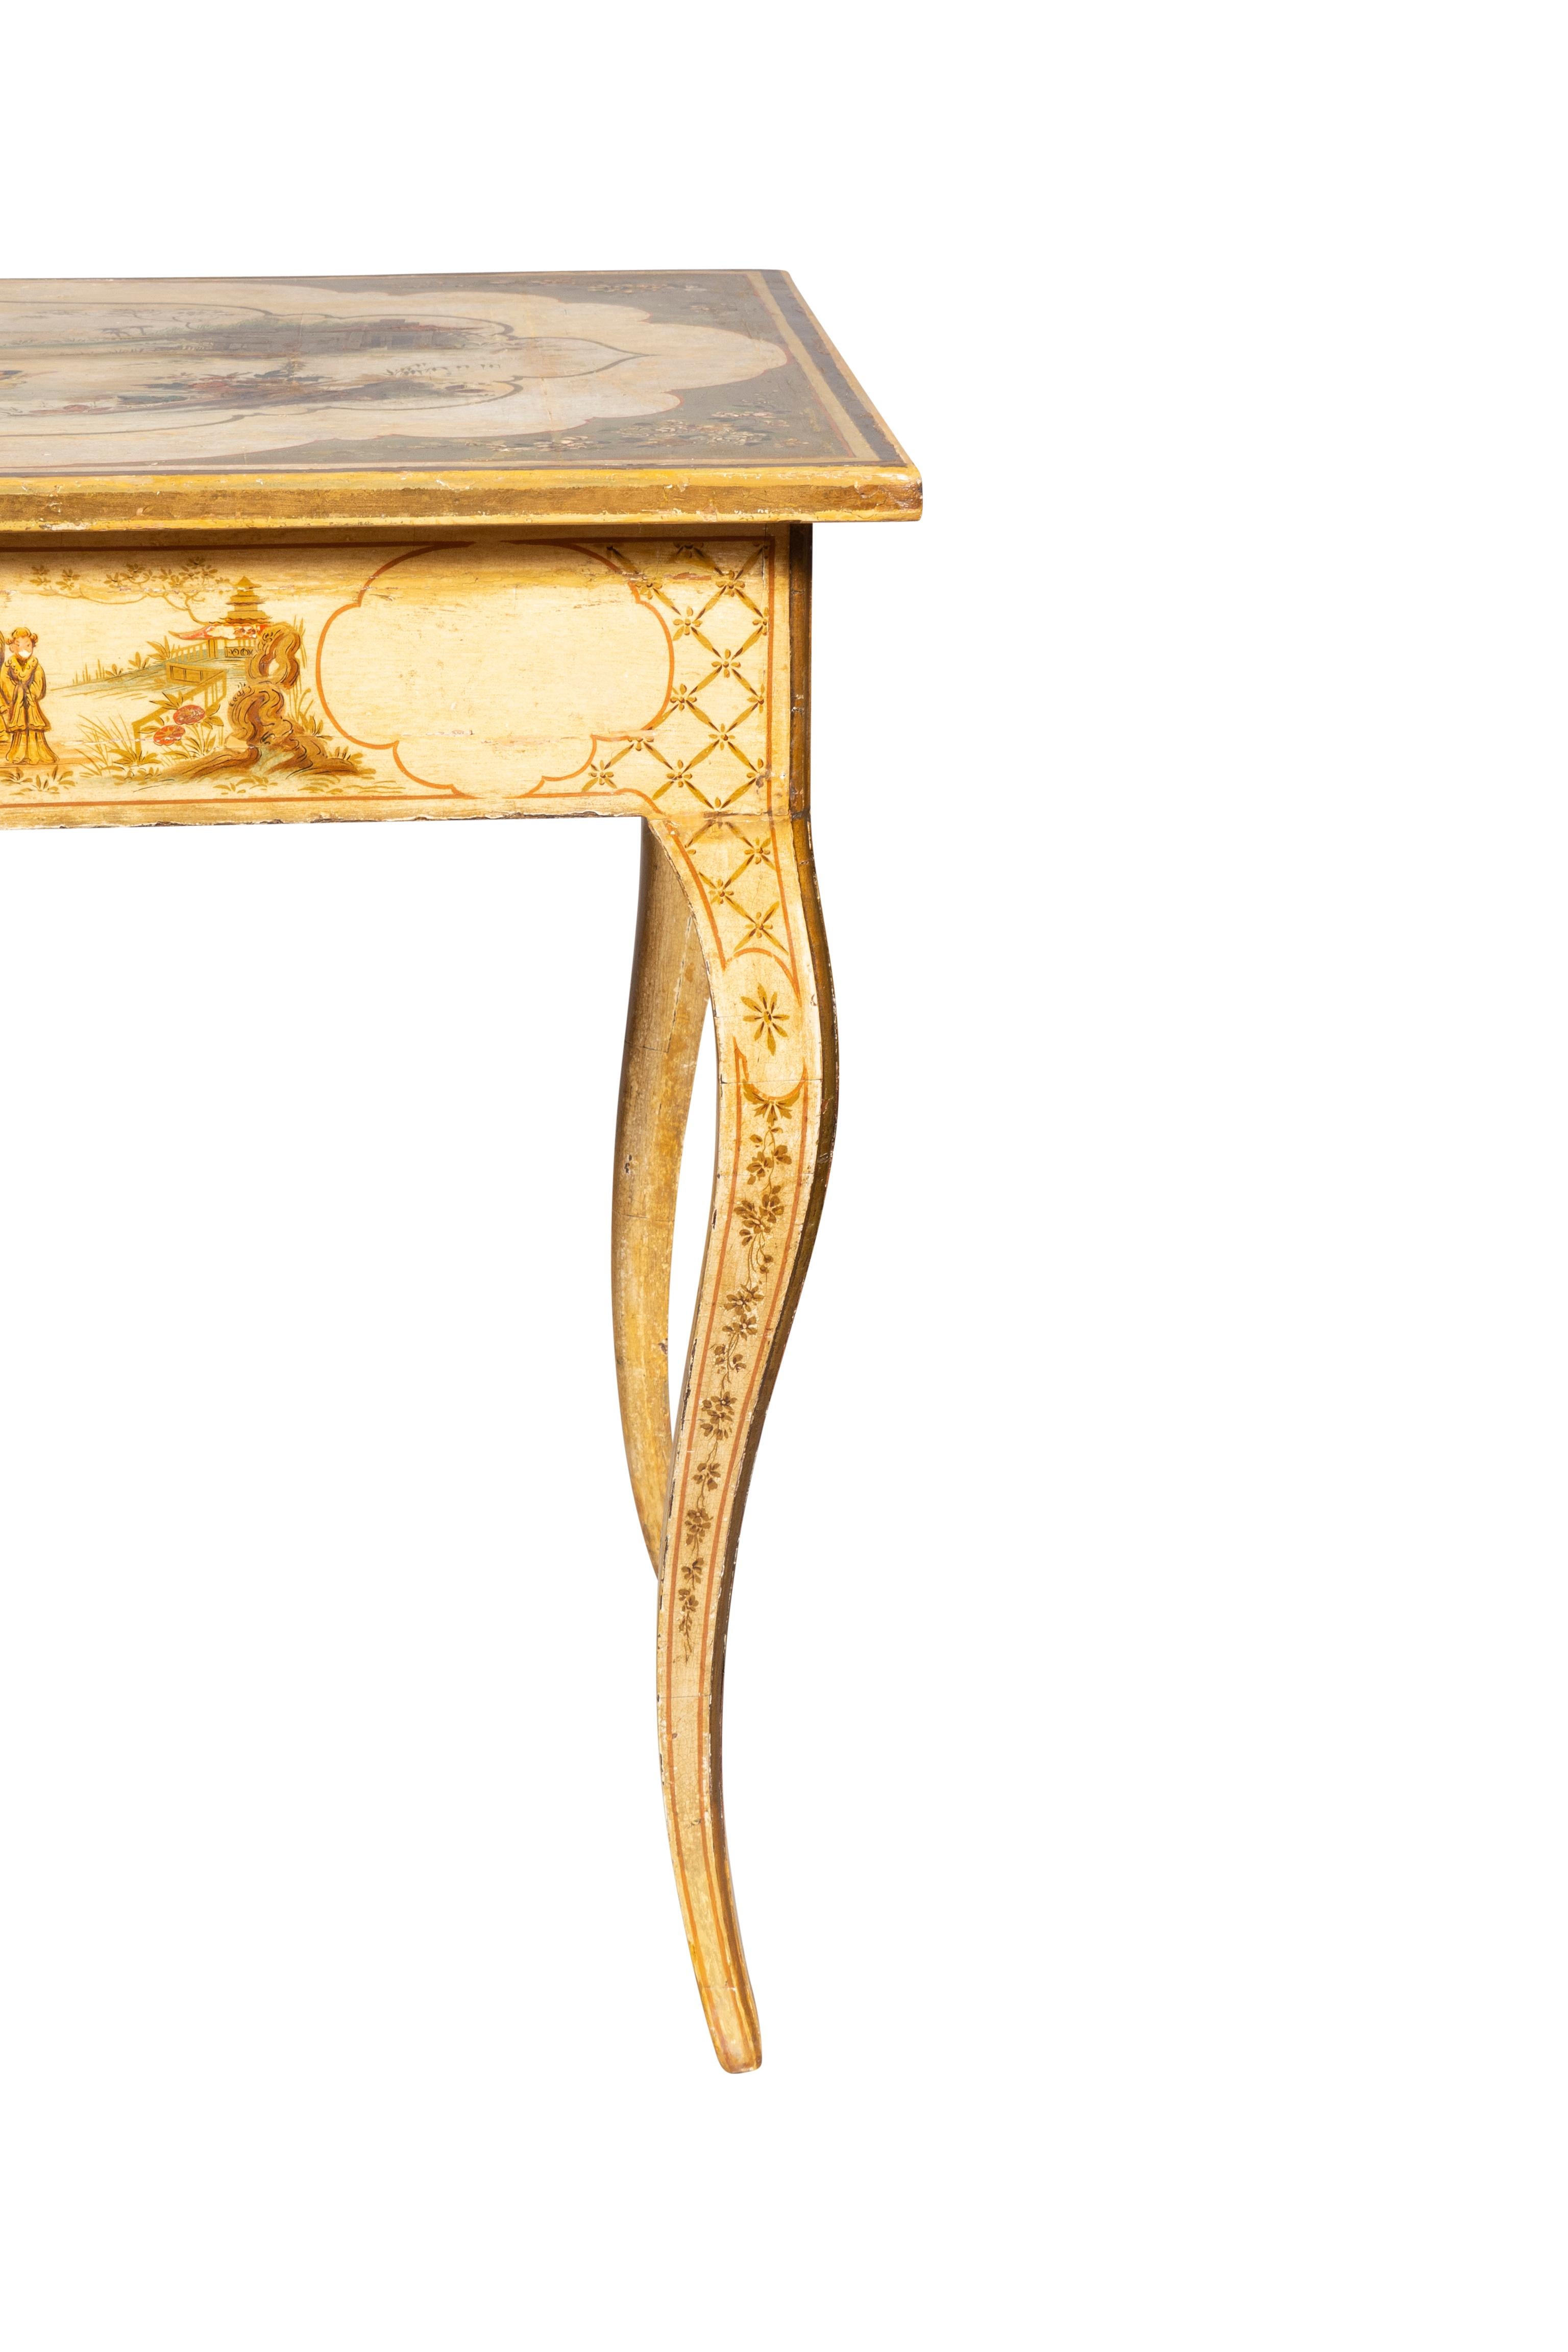 Italian Rococo Chinoiserie Decorated Table For Sale 7